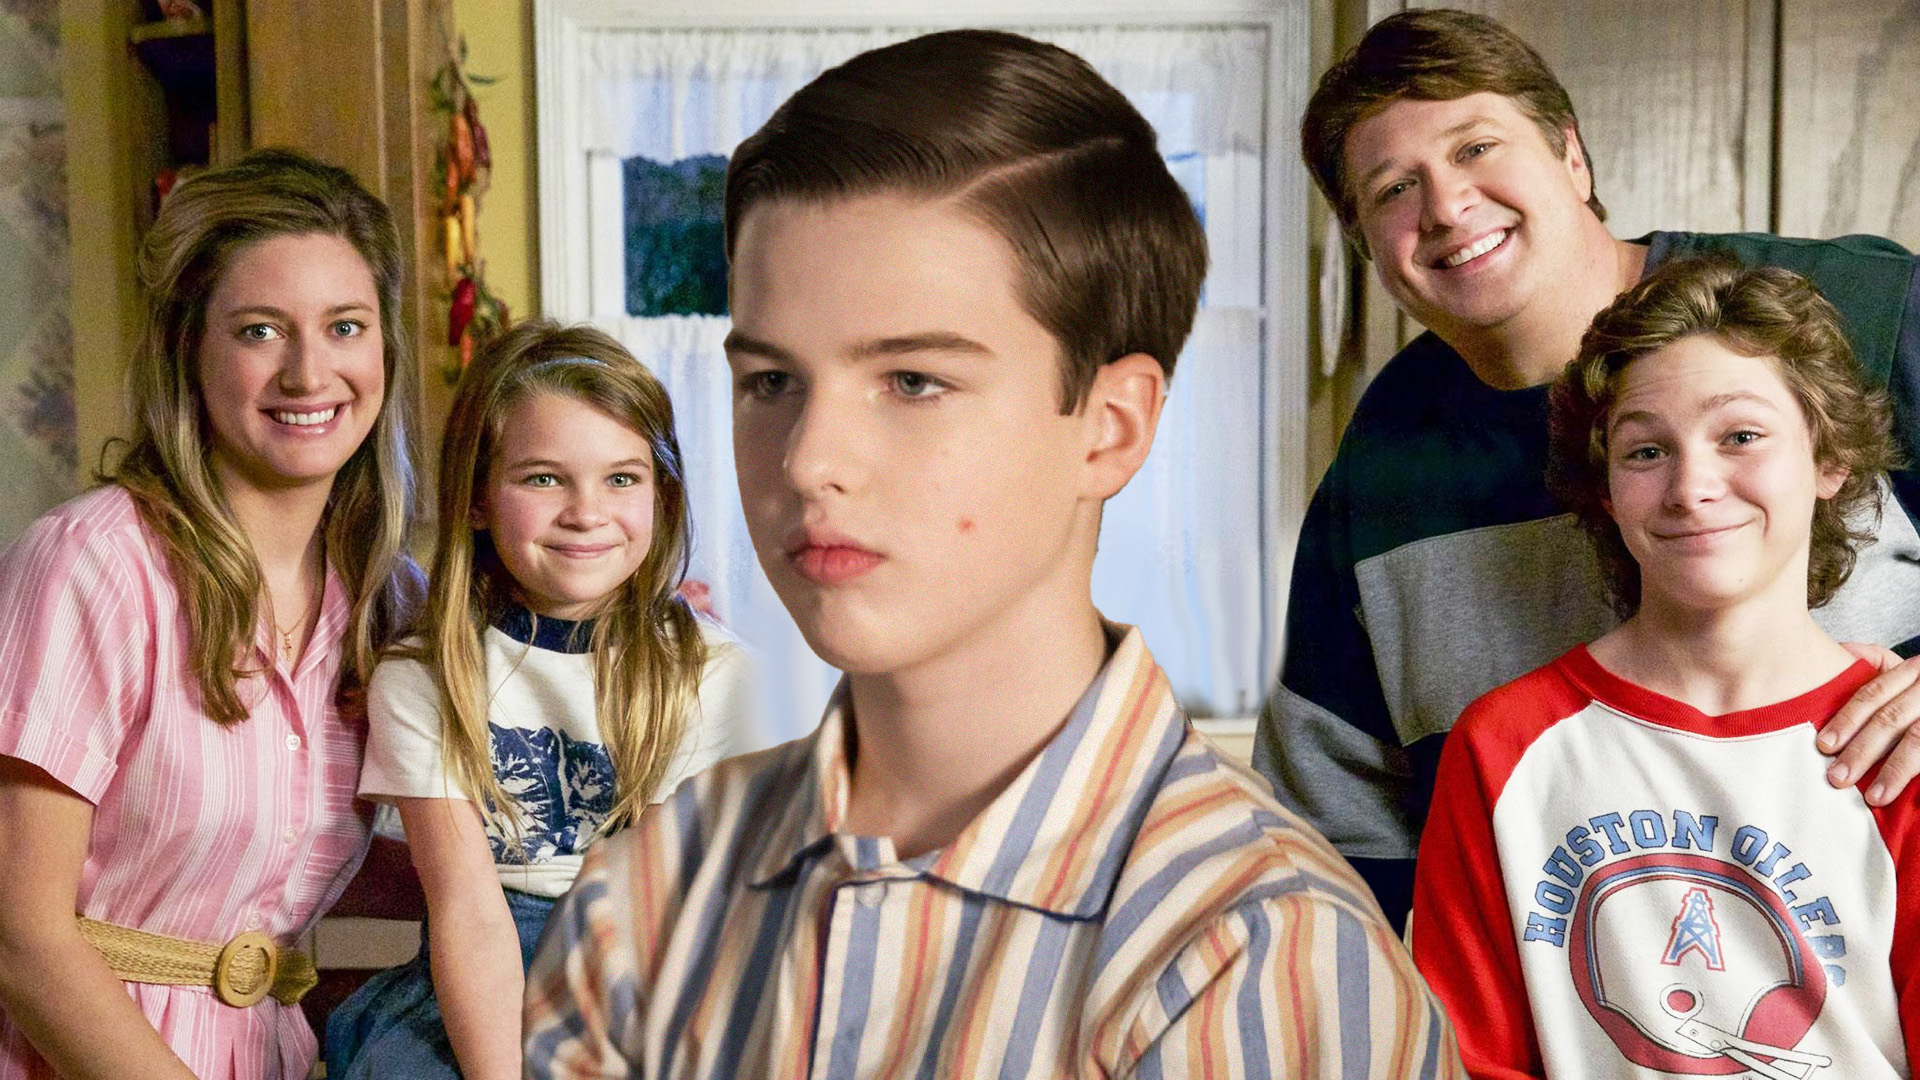 Next Up on Young Sheldon: What to Expect from Episode 3 of Season 7